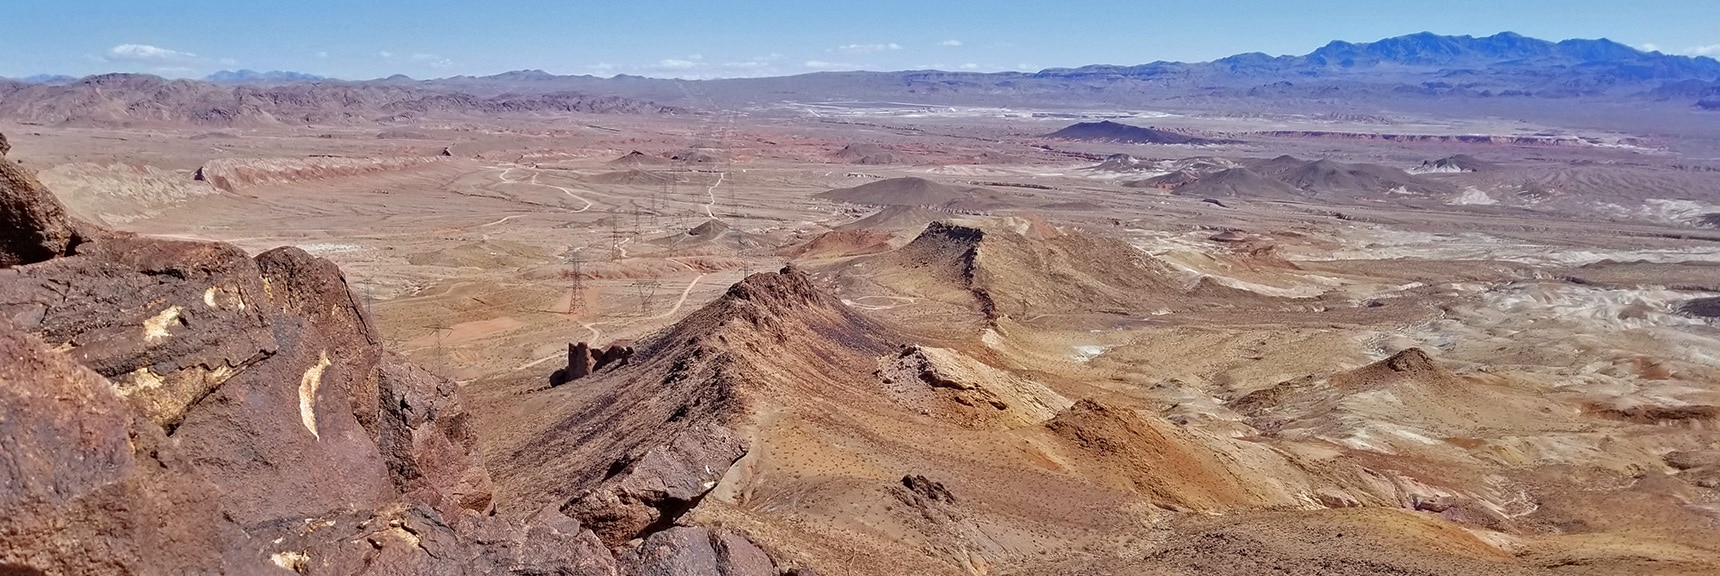 Looking Back North While Ascending the North Ridge of Lava Butte | Lava Butte | Lake Mead National Recreation Area, Nevada